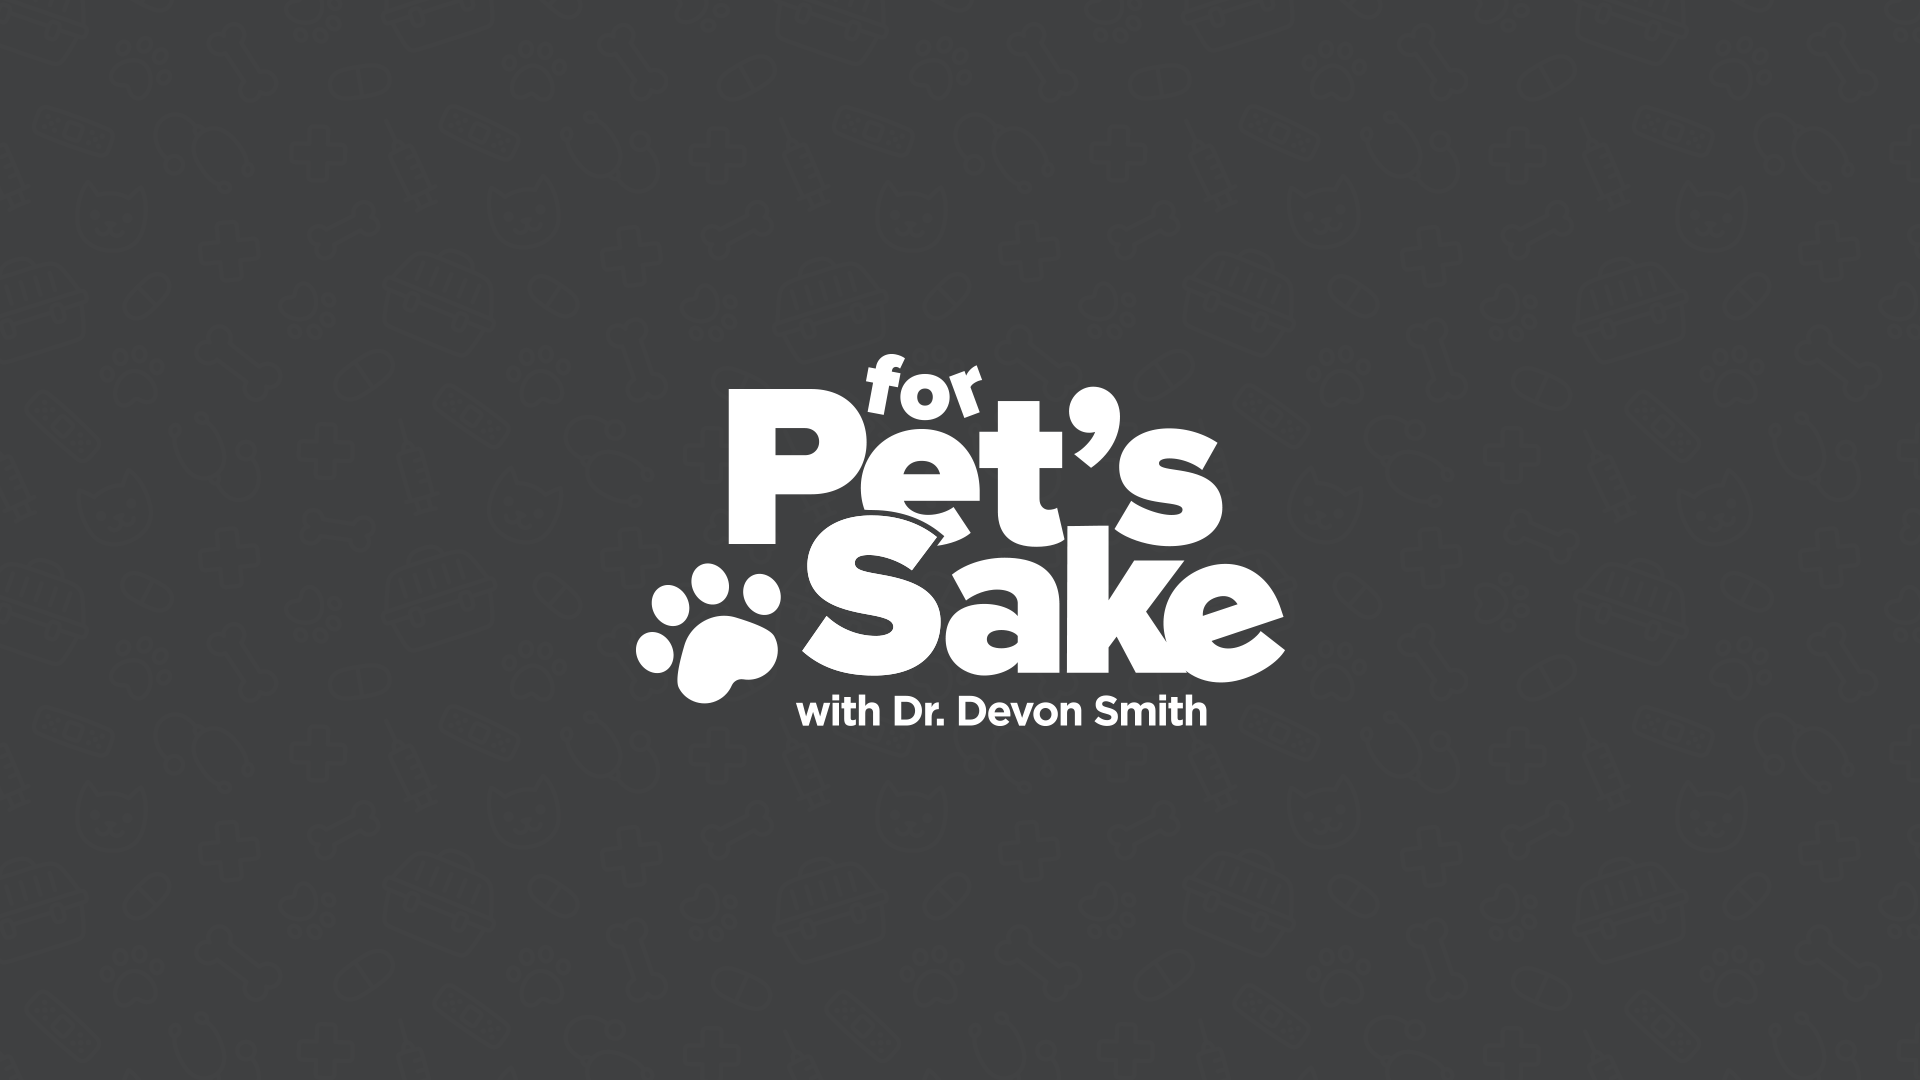 For Pet's Sake with Dr. Devon Smith logo in black and white